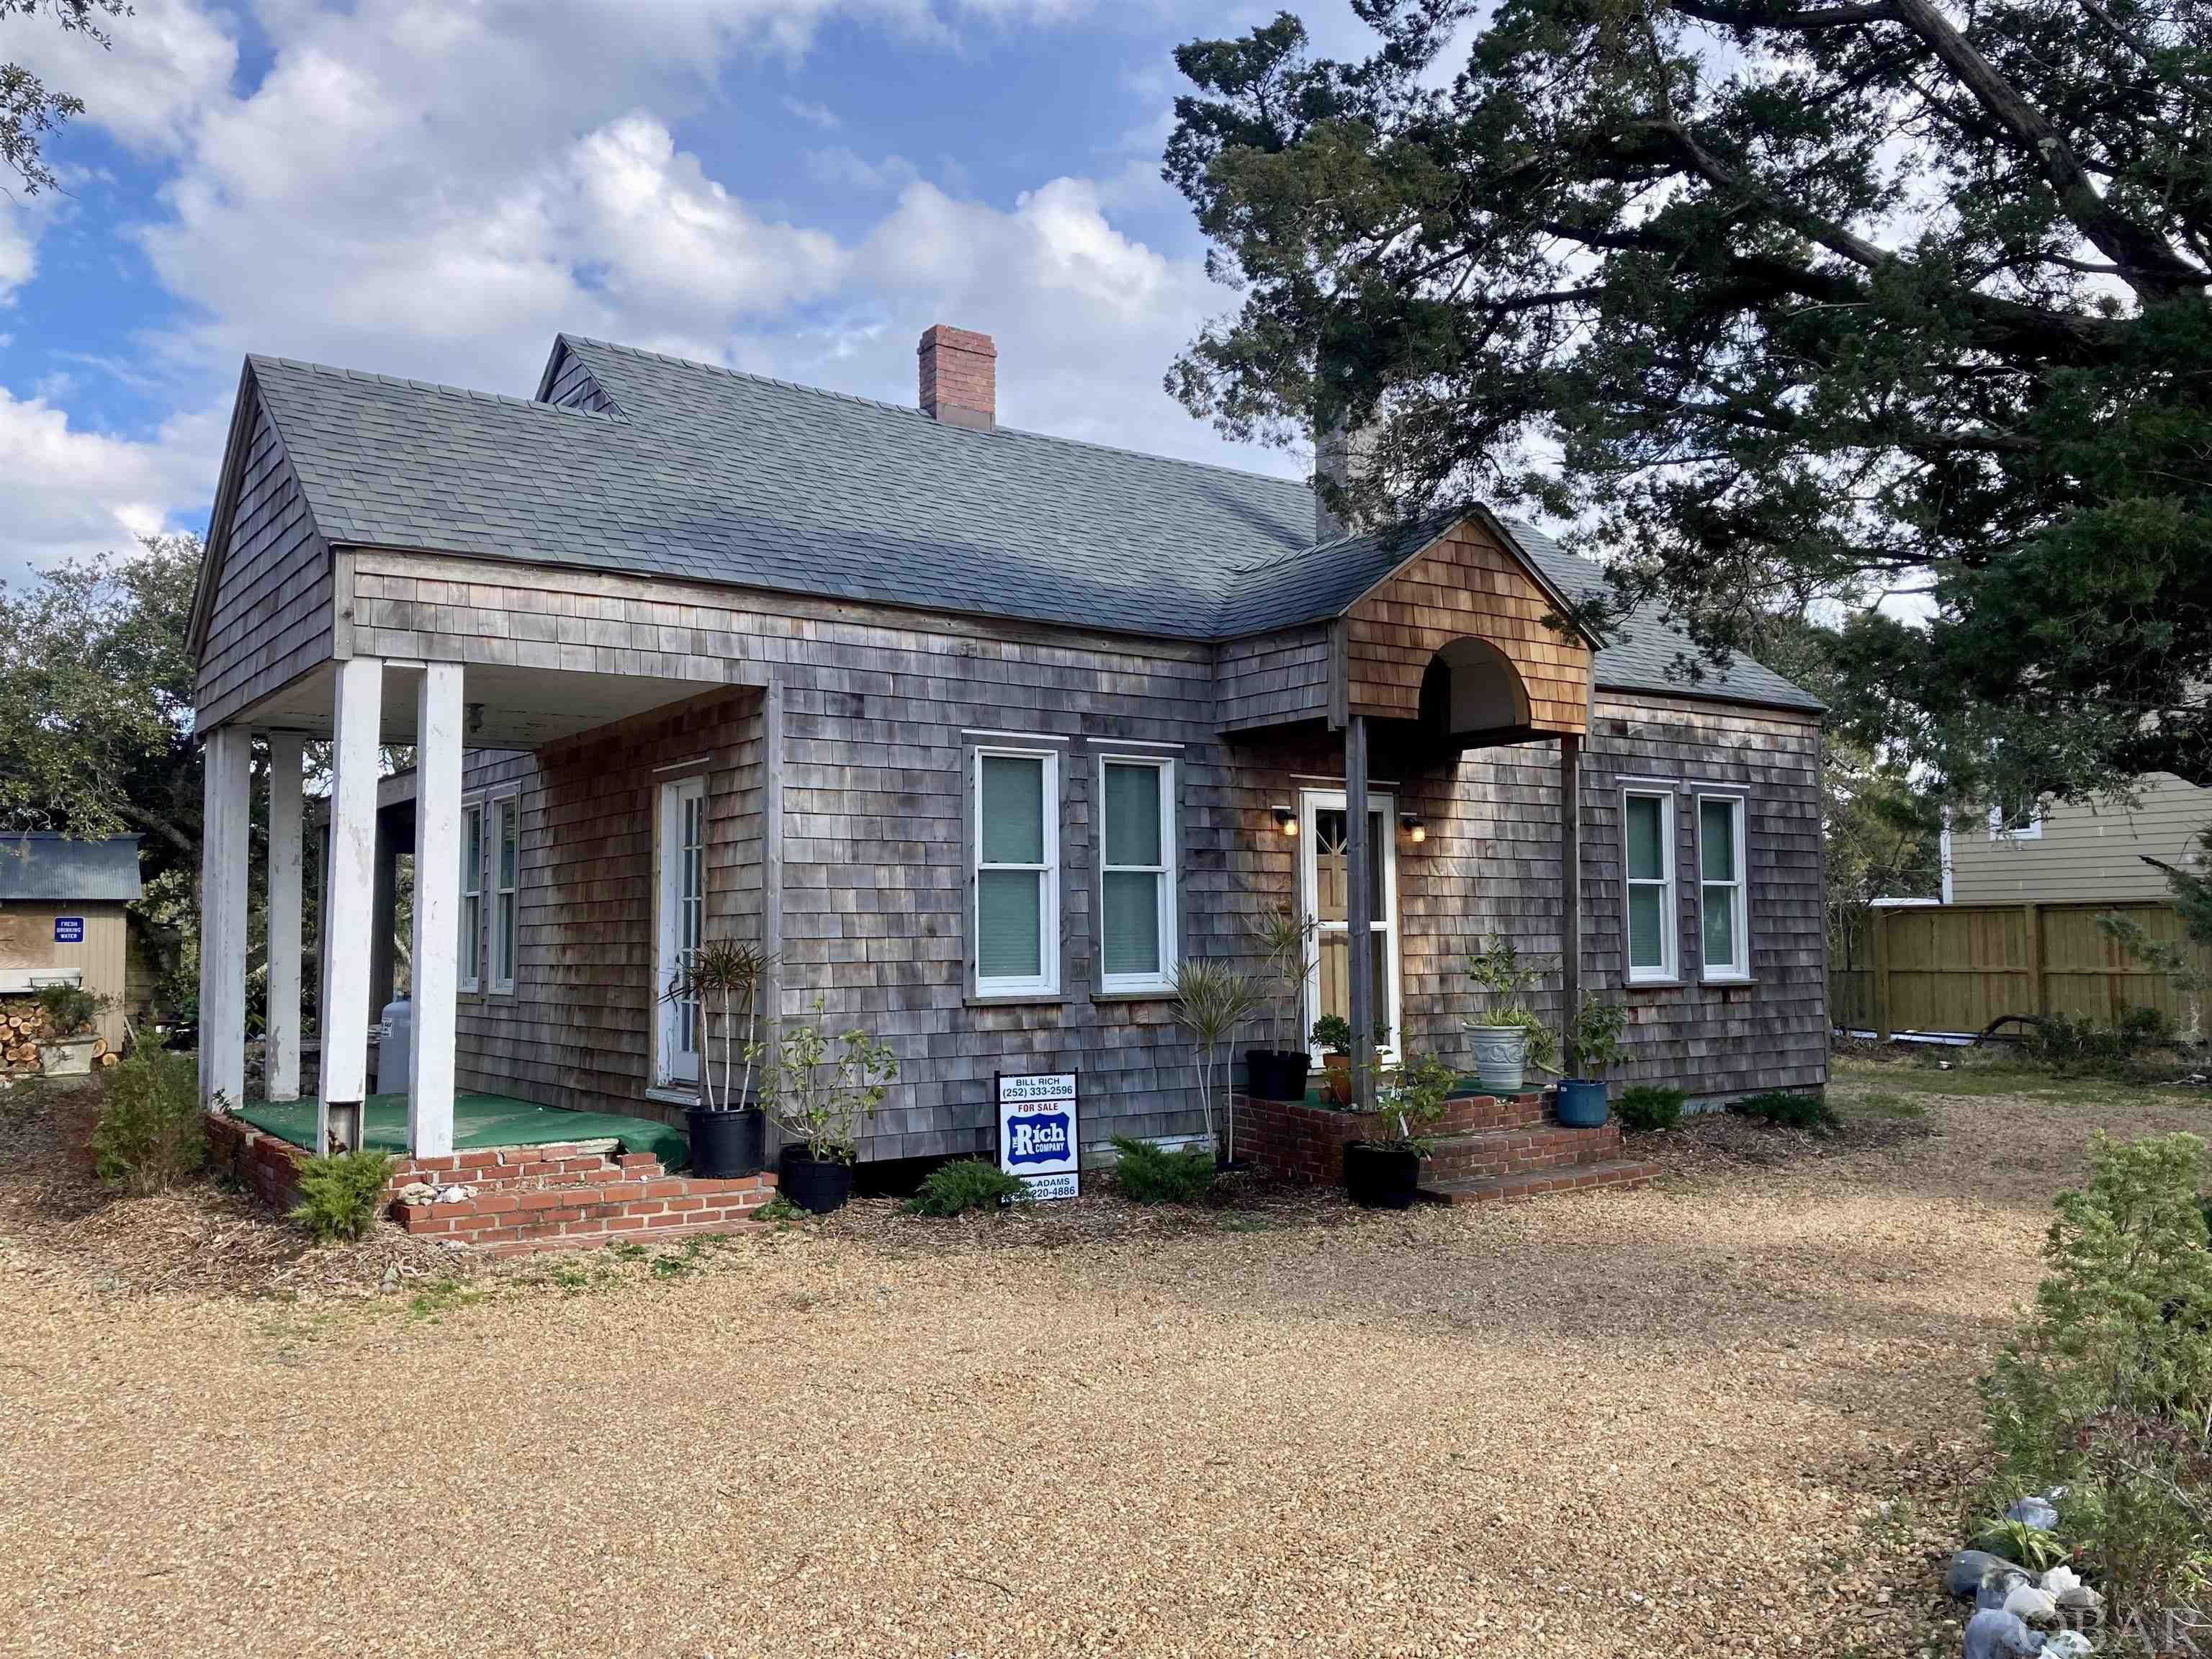 This historic Ocracoke home was recently remodeled inside and out and boasts meticulously cared for gardens. Brand new cedar shake siding, wood floors, impact glass double hung Pella windows, insulation, electrical, and travertine tile and teak bathroom. An expansive living area welcomes you through the front door and empties onto an idyllic back porch that is perfect for relaxing and hosting. Within short walking distance of coffee shops, the harbor, and Ocracoke's finest restaurants. This home would make an excellent vacation rental or year-round residence. Large lot of over 8,000 sq ft. Upstairs offers a fresh drawing board for a future master suite and large private balcony already in place. Upgrades include a new roof in 2017 and new hot water heater. Adjoining lots available with 3 bedroom septic permits on file, build a second home or enjoy the additional green space.